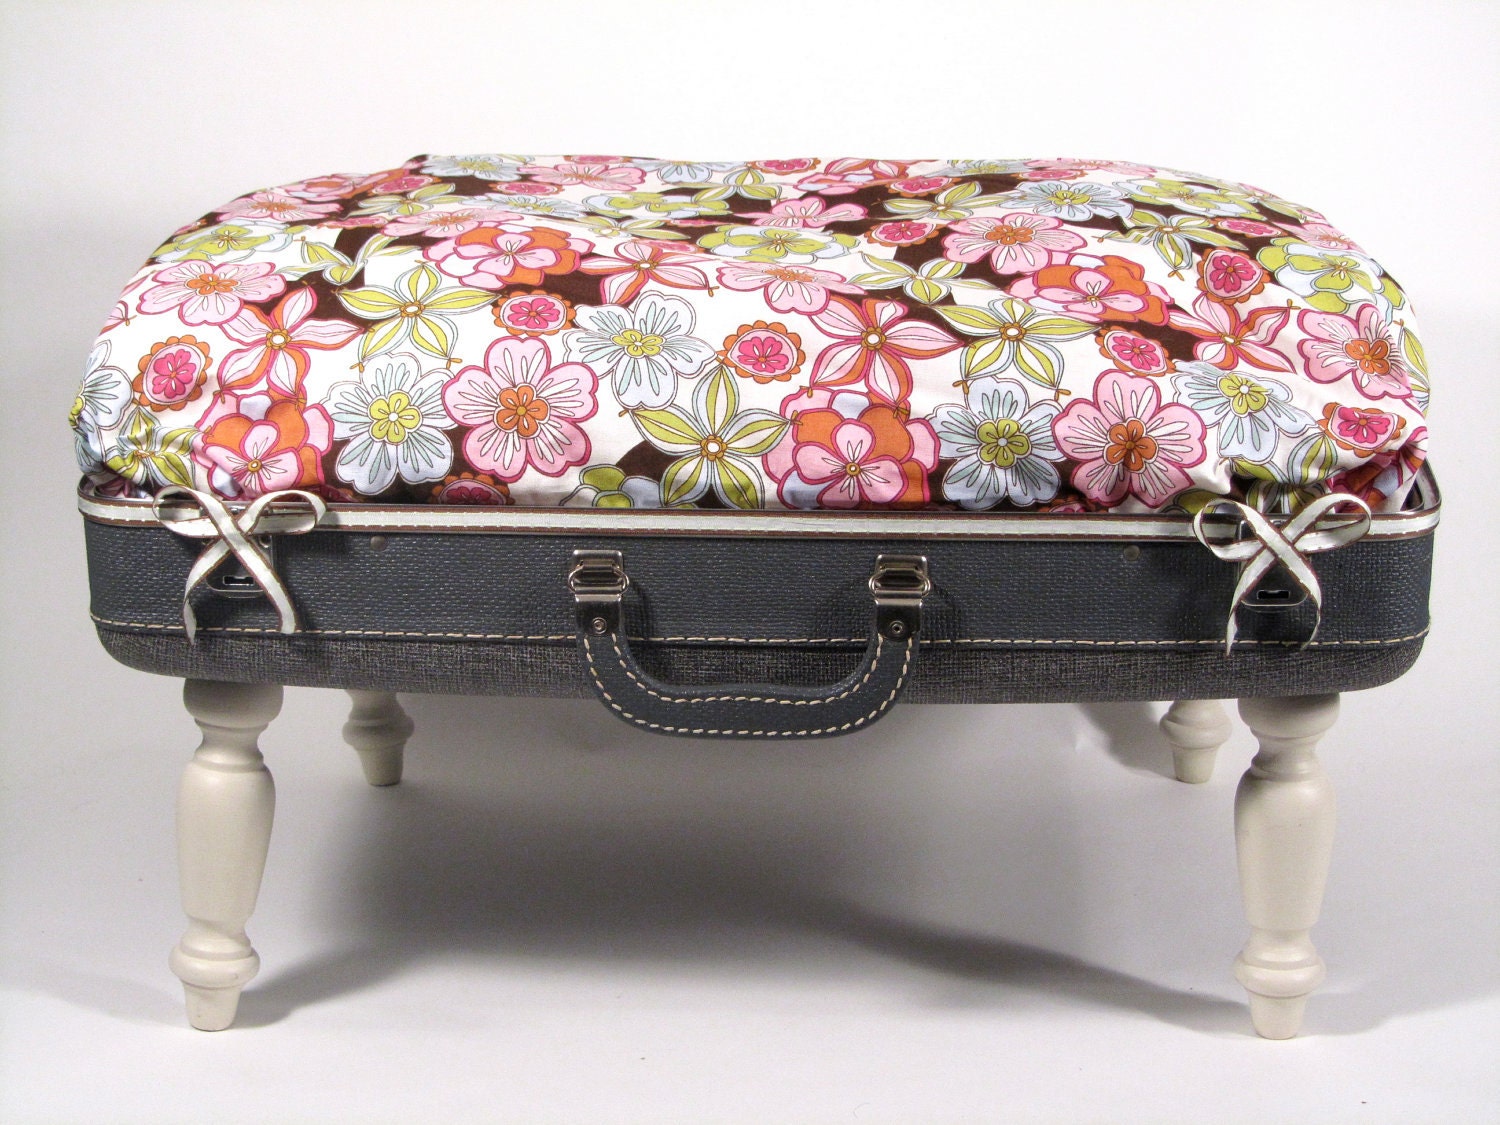 Pet Bed Vintage UpCycled / Reclaimed Suitcase